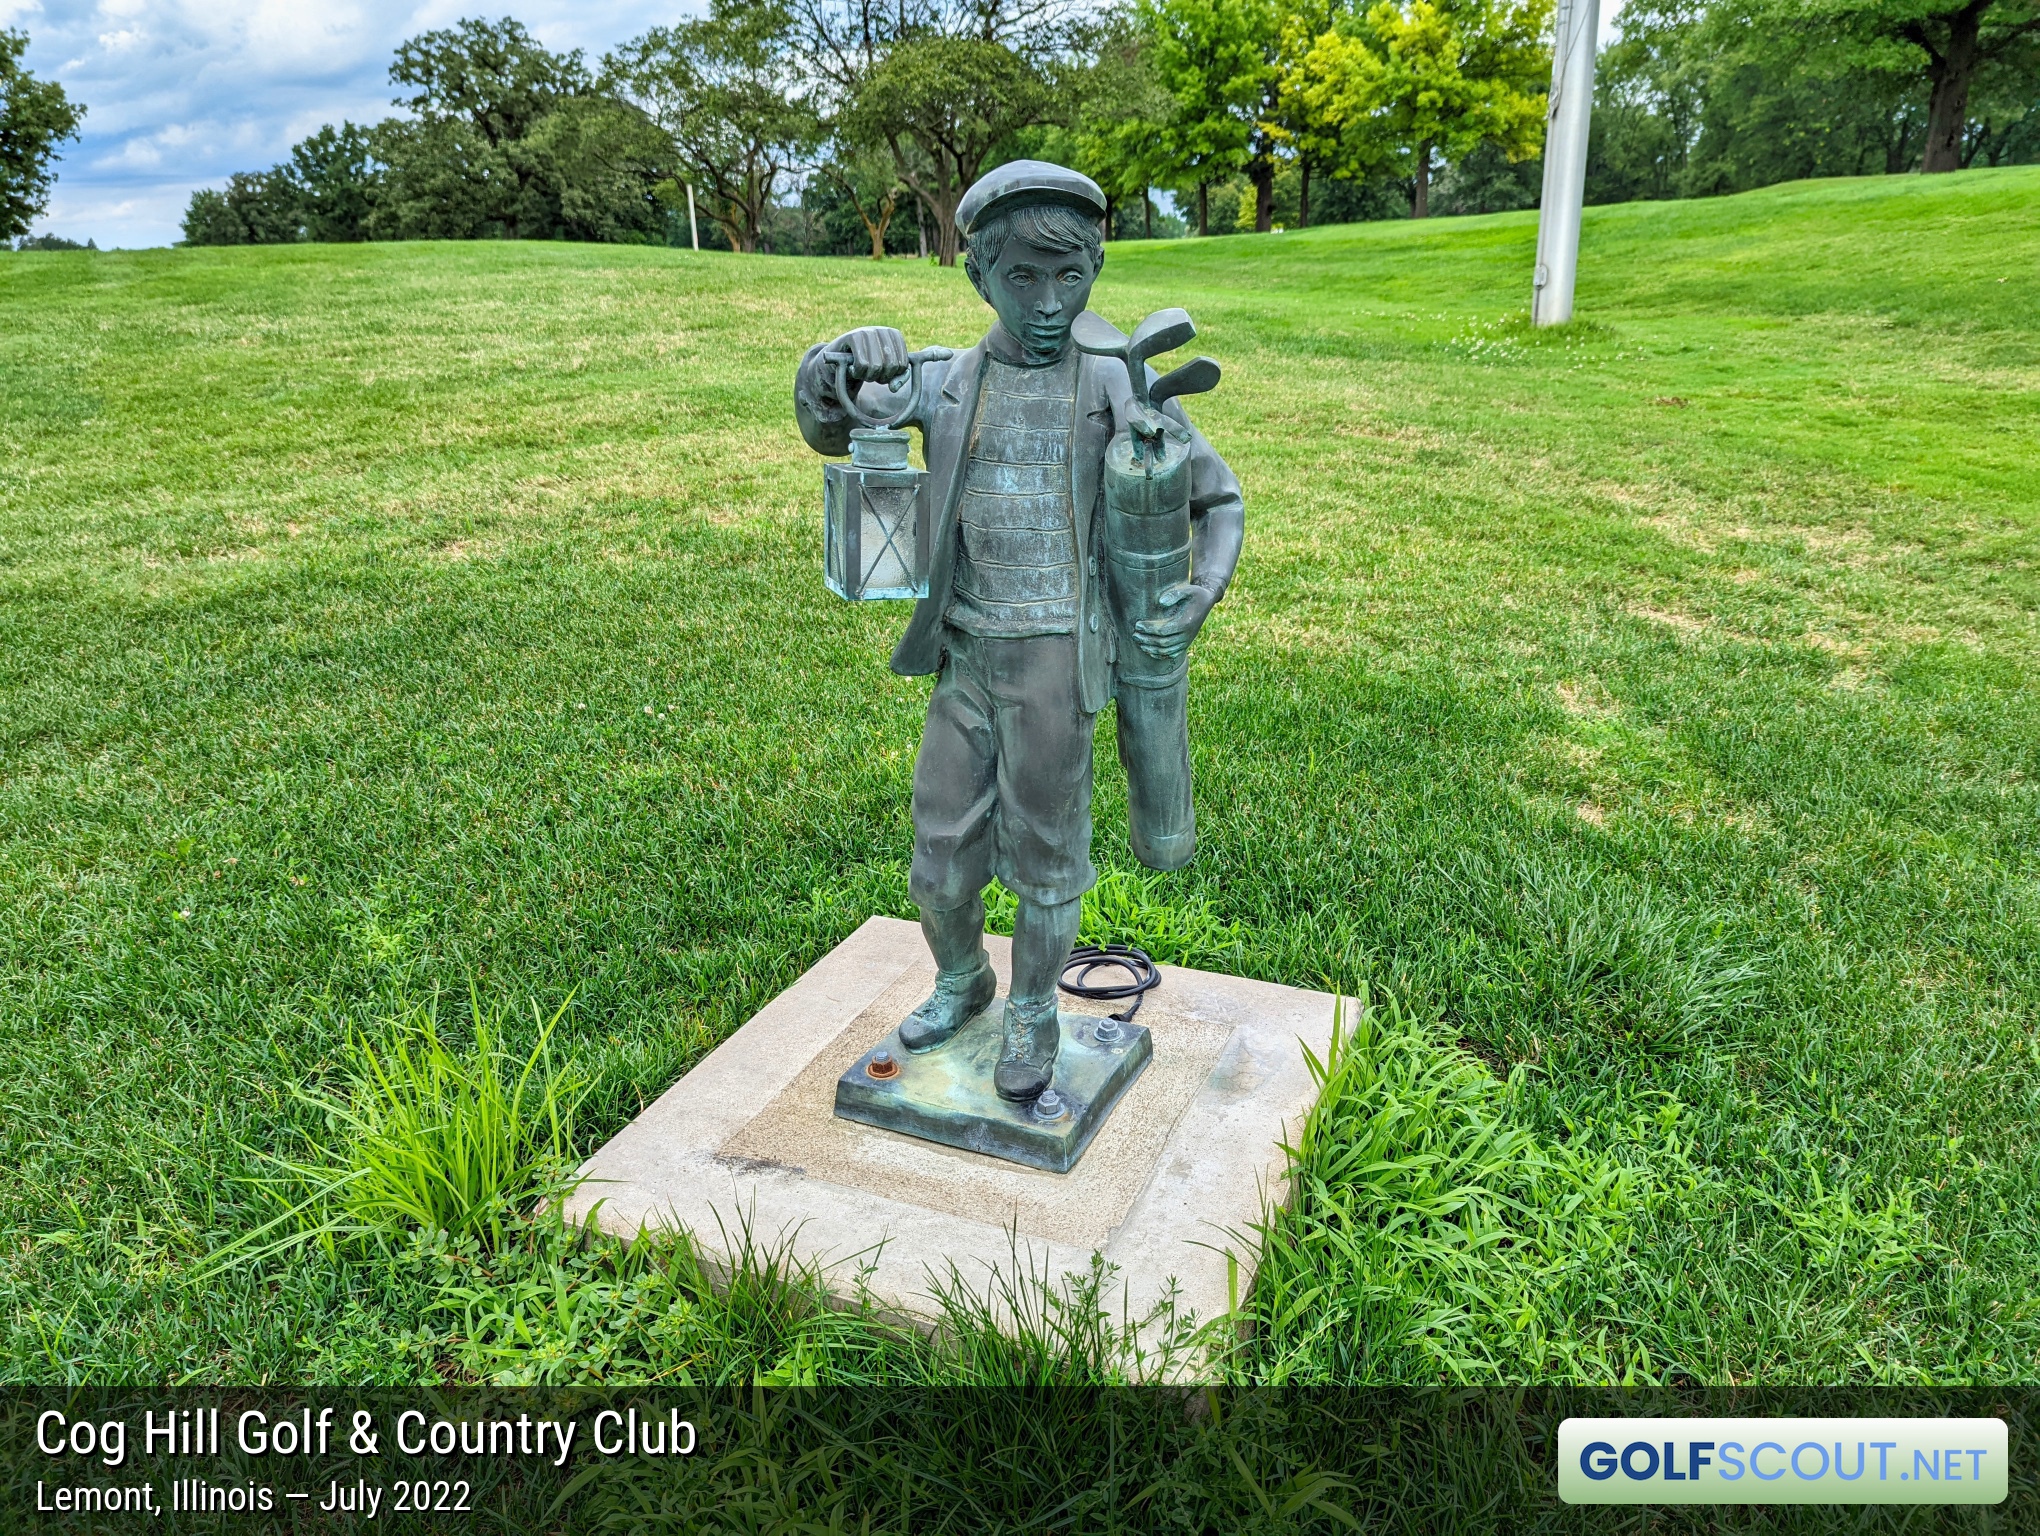 Miscellaneous photo of Cog Hill Course #4 - Dubsdread in Lemont, Illinois. Who was this fella? I'd love to know.